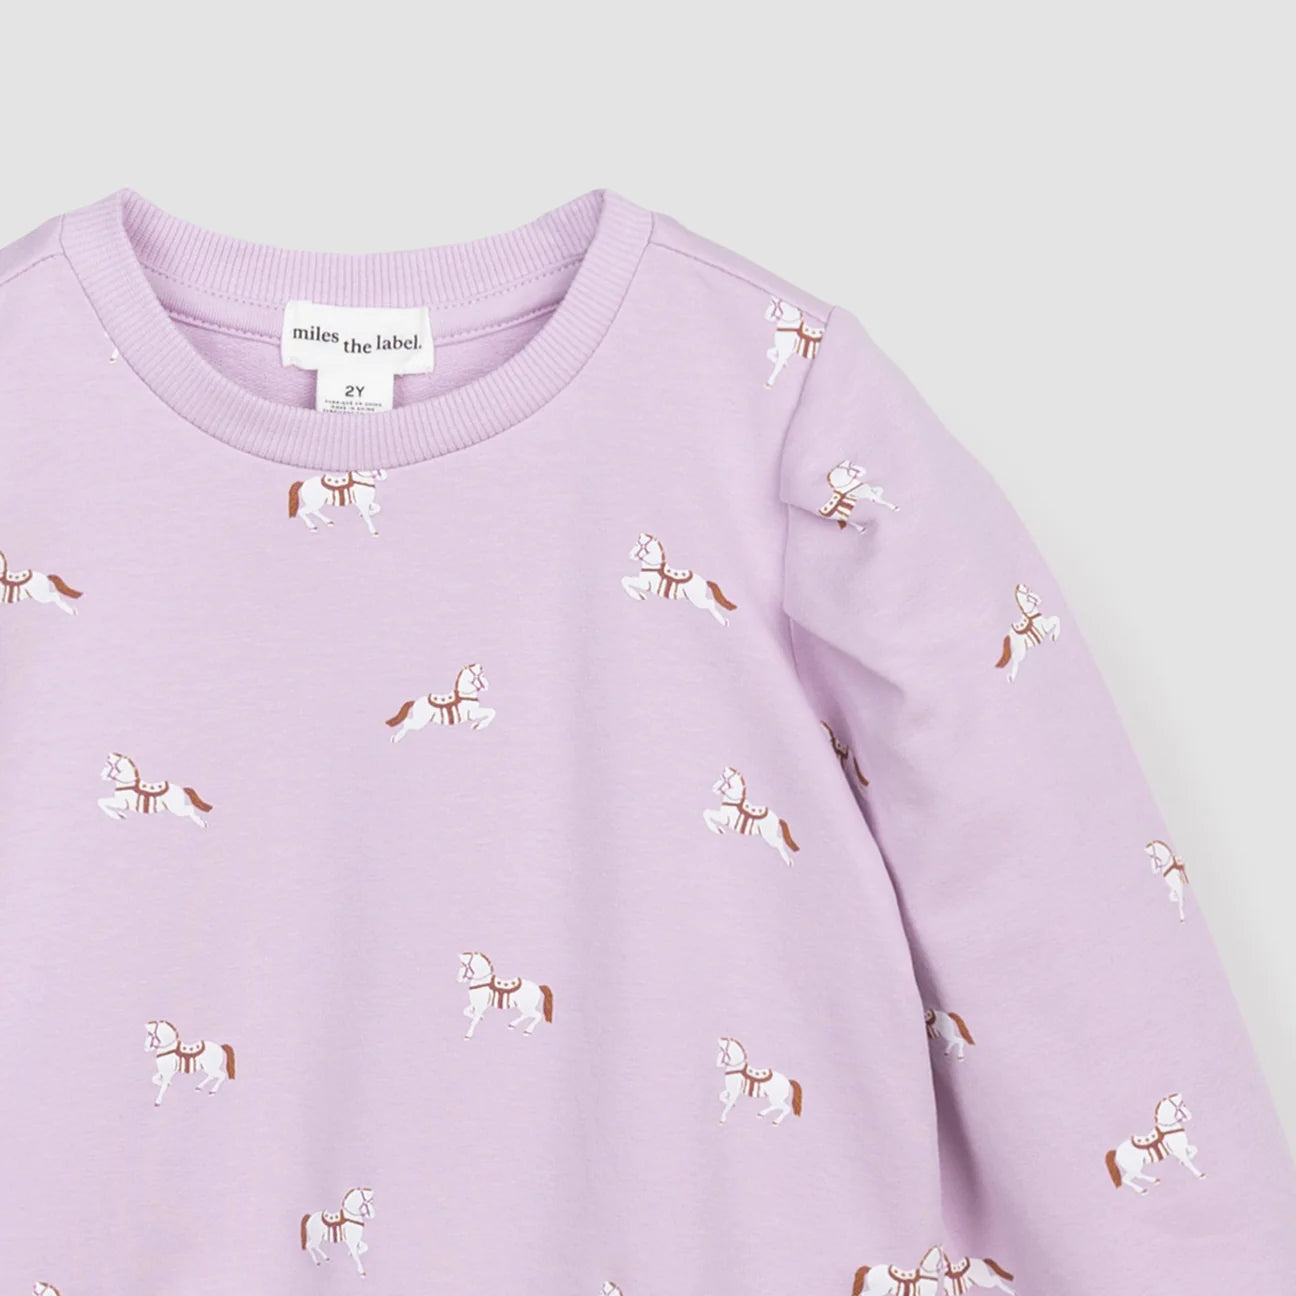 Filly Print on Orchid Sweatshirt